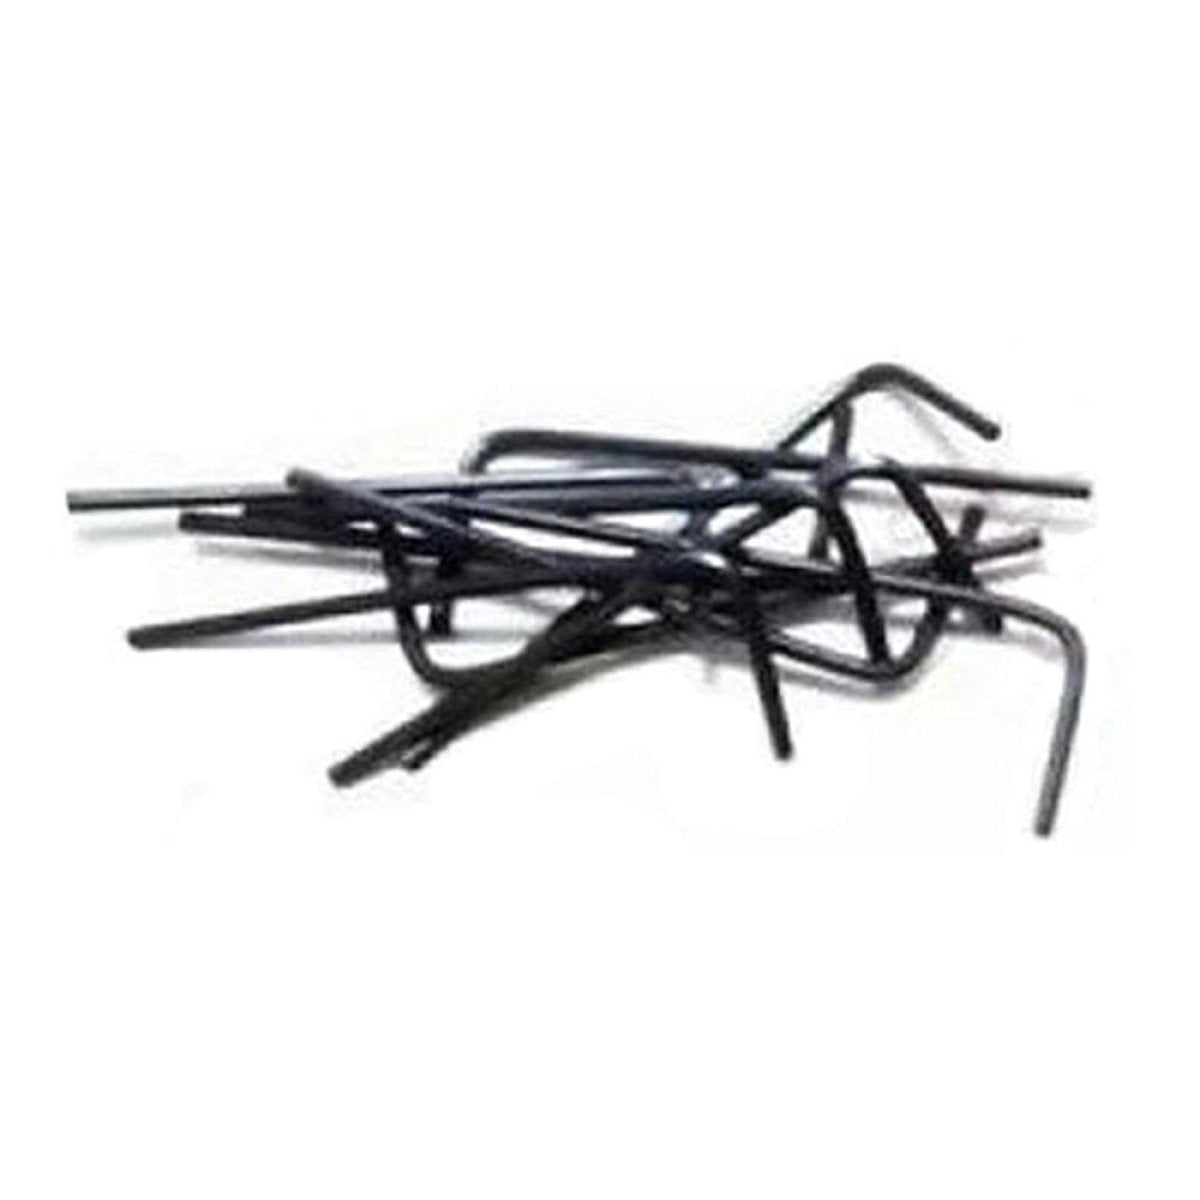 1.5mm 2mm 2.5mm 3mm 4mm 5mm Hex Key Keys Black Steel M1.5 M2 M2.5 M3 M4 M5 Wrench Tool - 2pcs 1.5mm - - Asia Sell